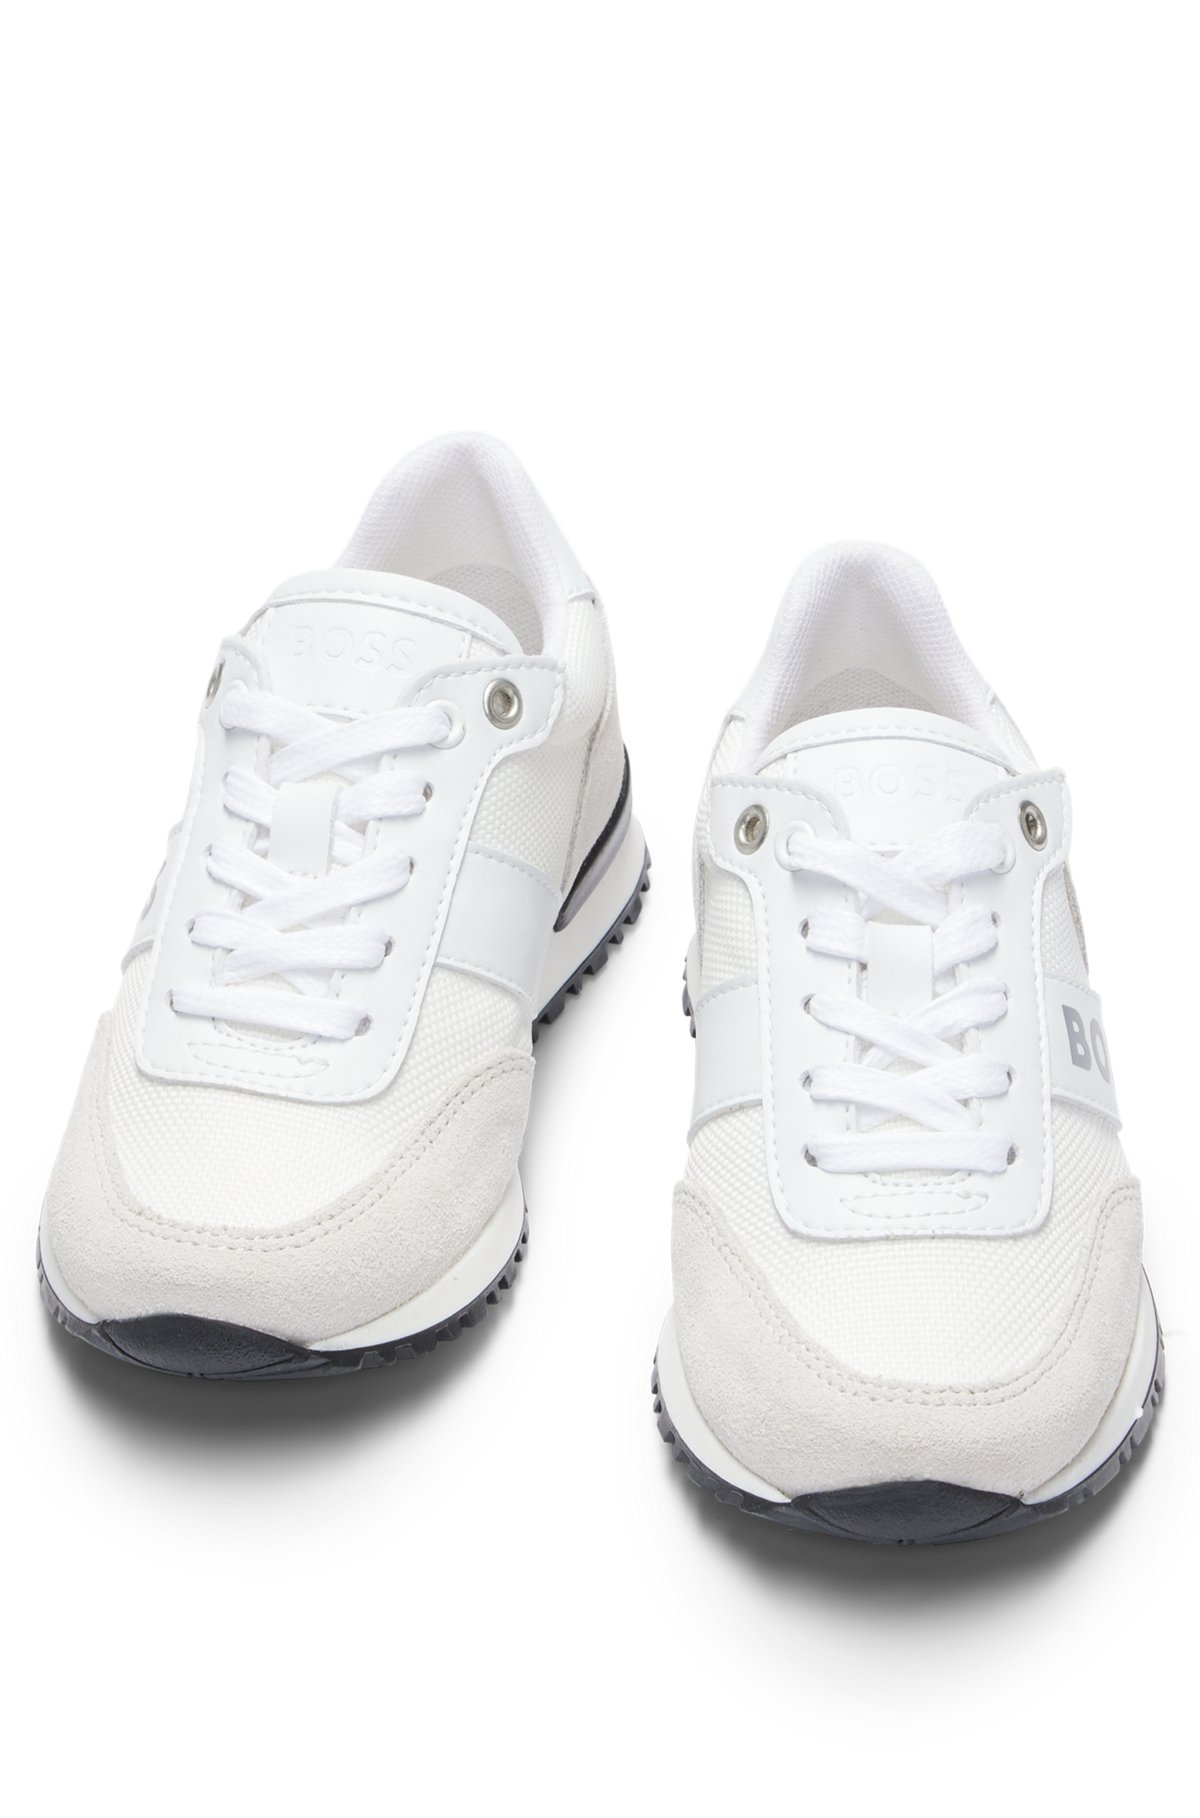 Kids' trainers in mixed materials with contrast logo, White